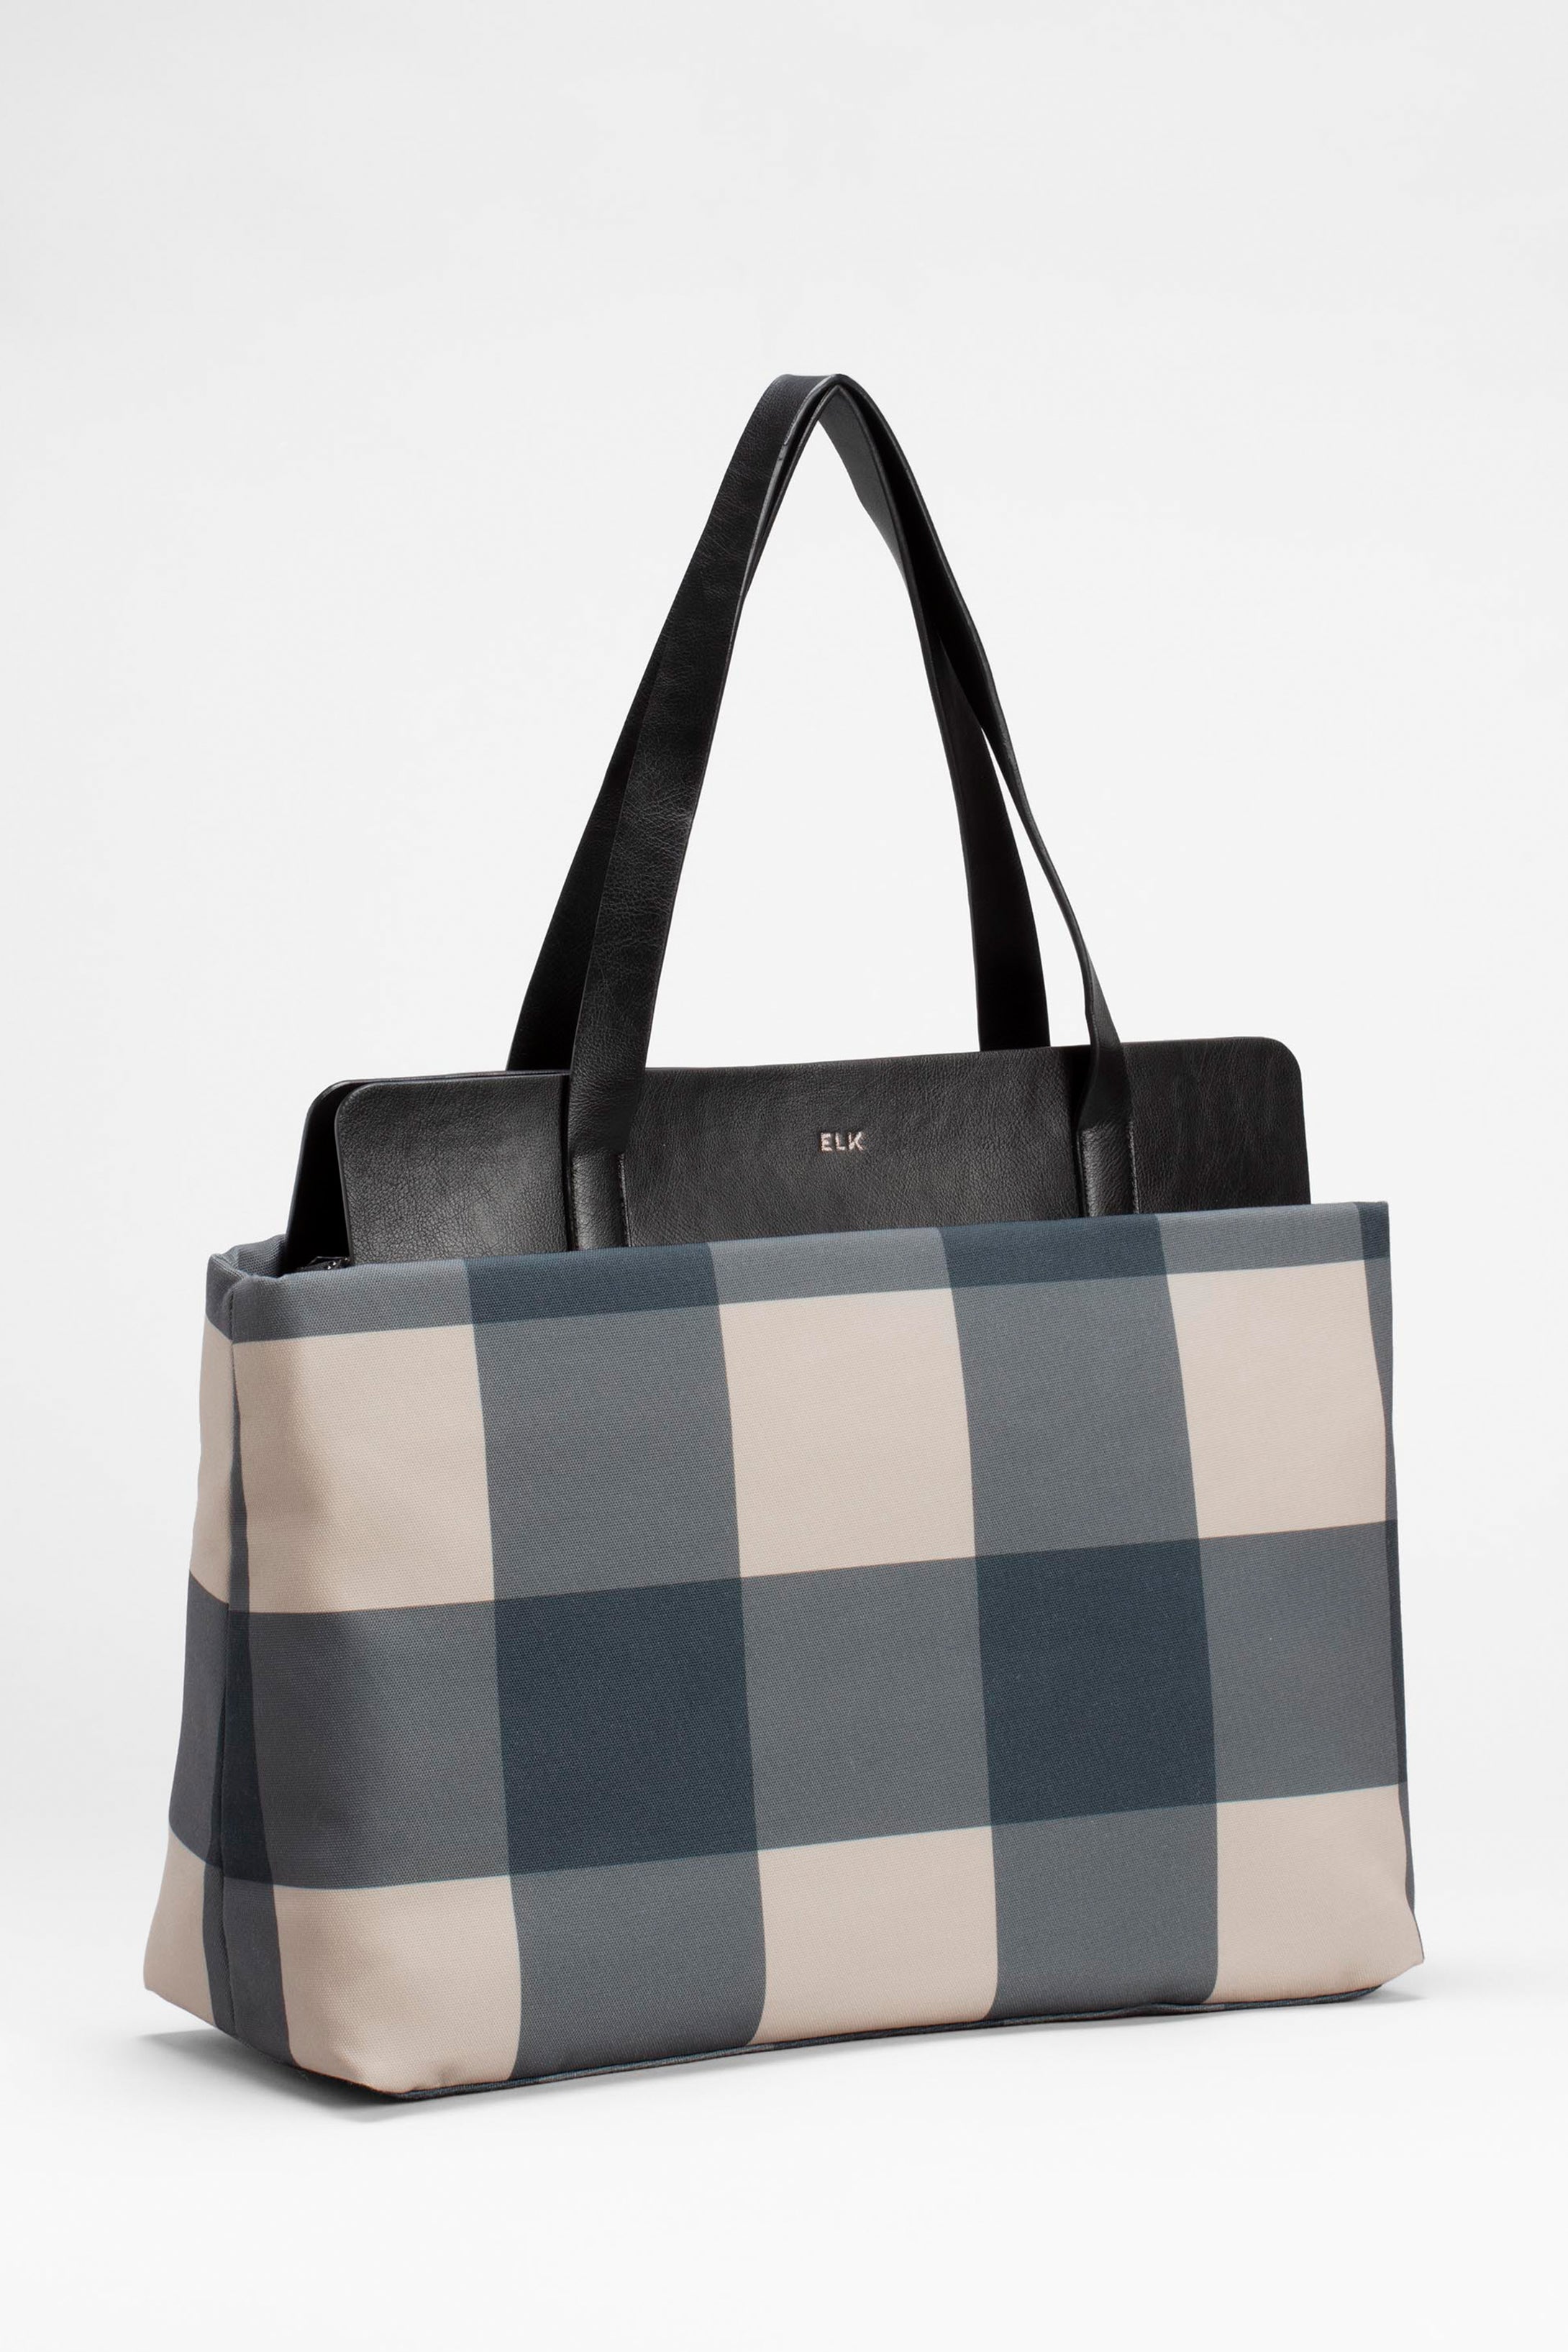 Kilve Recycled Fabric Shopper Front  BLACK CAMEL GINGHAM